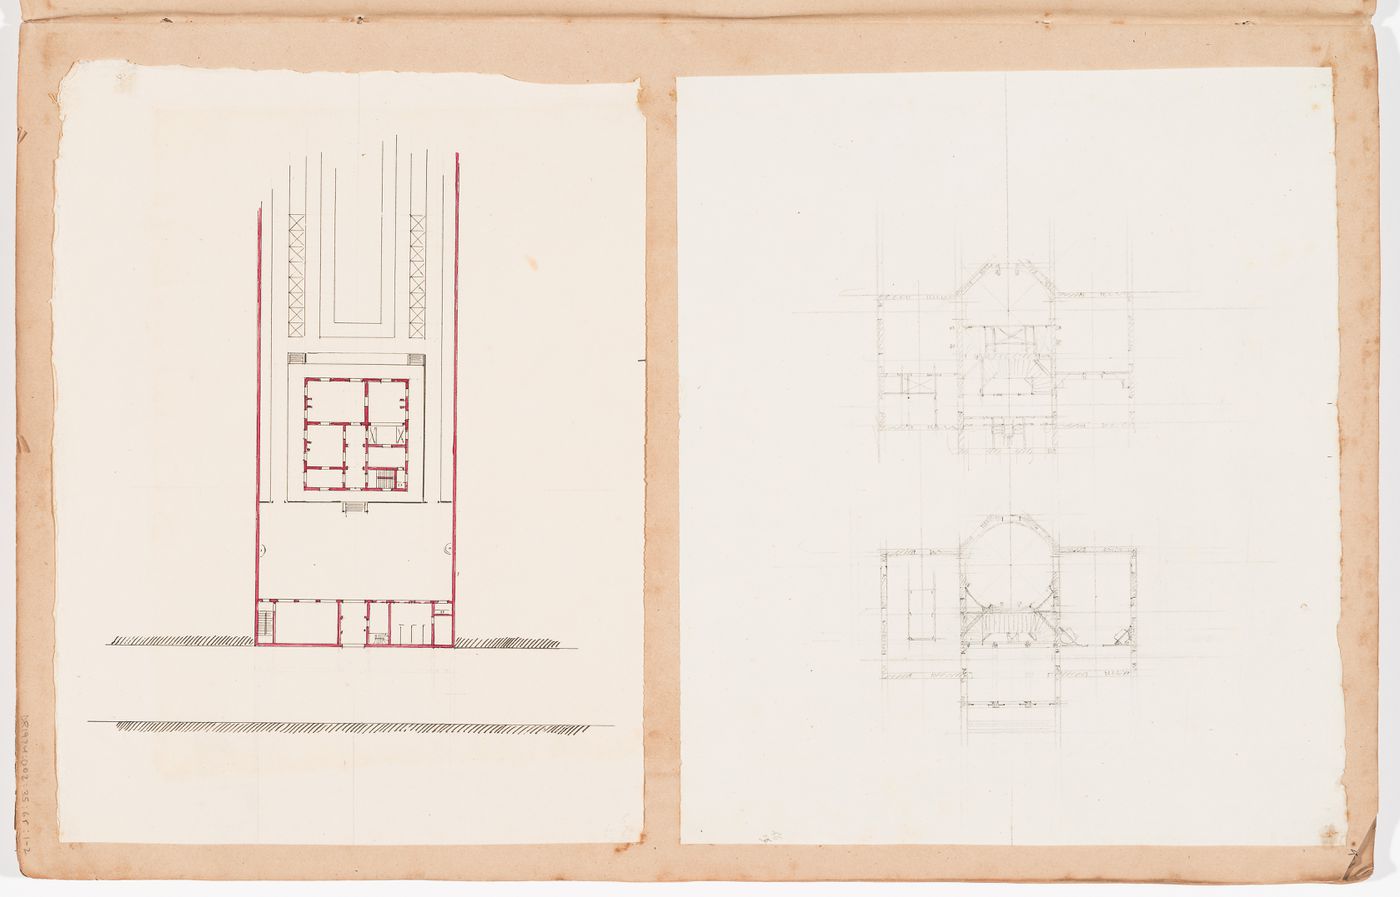 Plans for an unidentified house and site plans for a house, possibly on rue d'Aguesseau; verso: Sketch plan for a house on rue d'Aguesseau, Paris